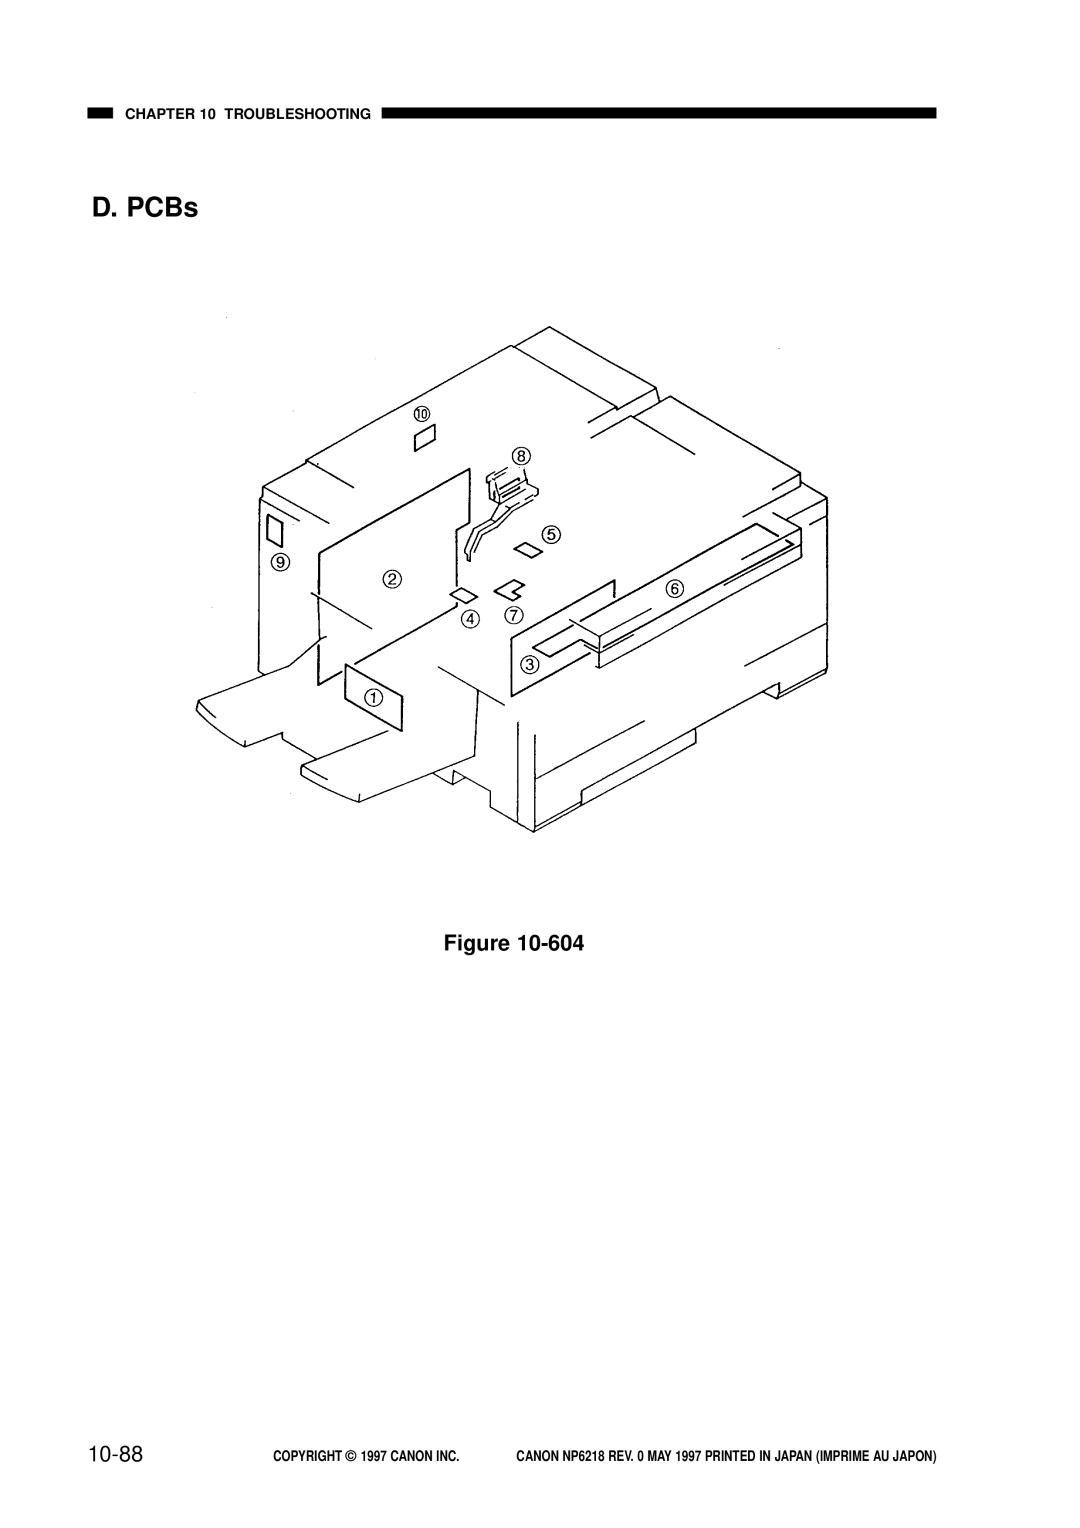 Canon NP6218, FY8-13EX-000 service manual D. PCBs, 10-88, Troubleshooting, COPYRIGHT 1997 CANON INC 